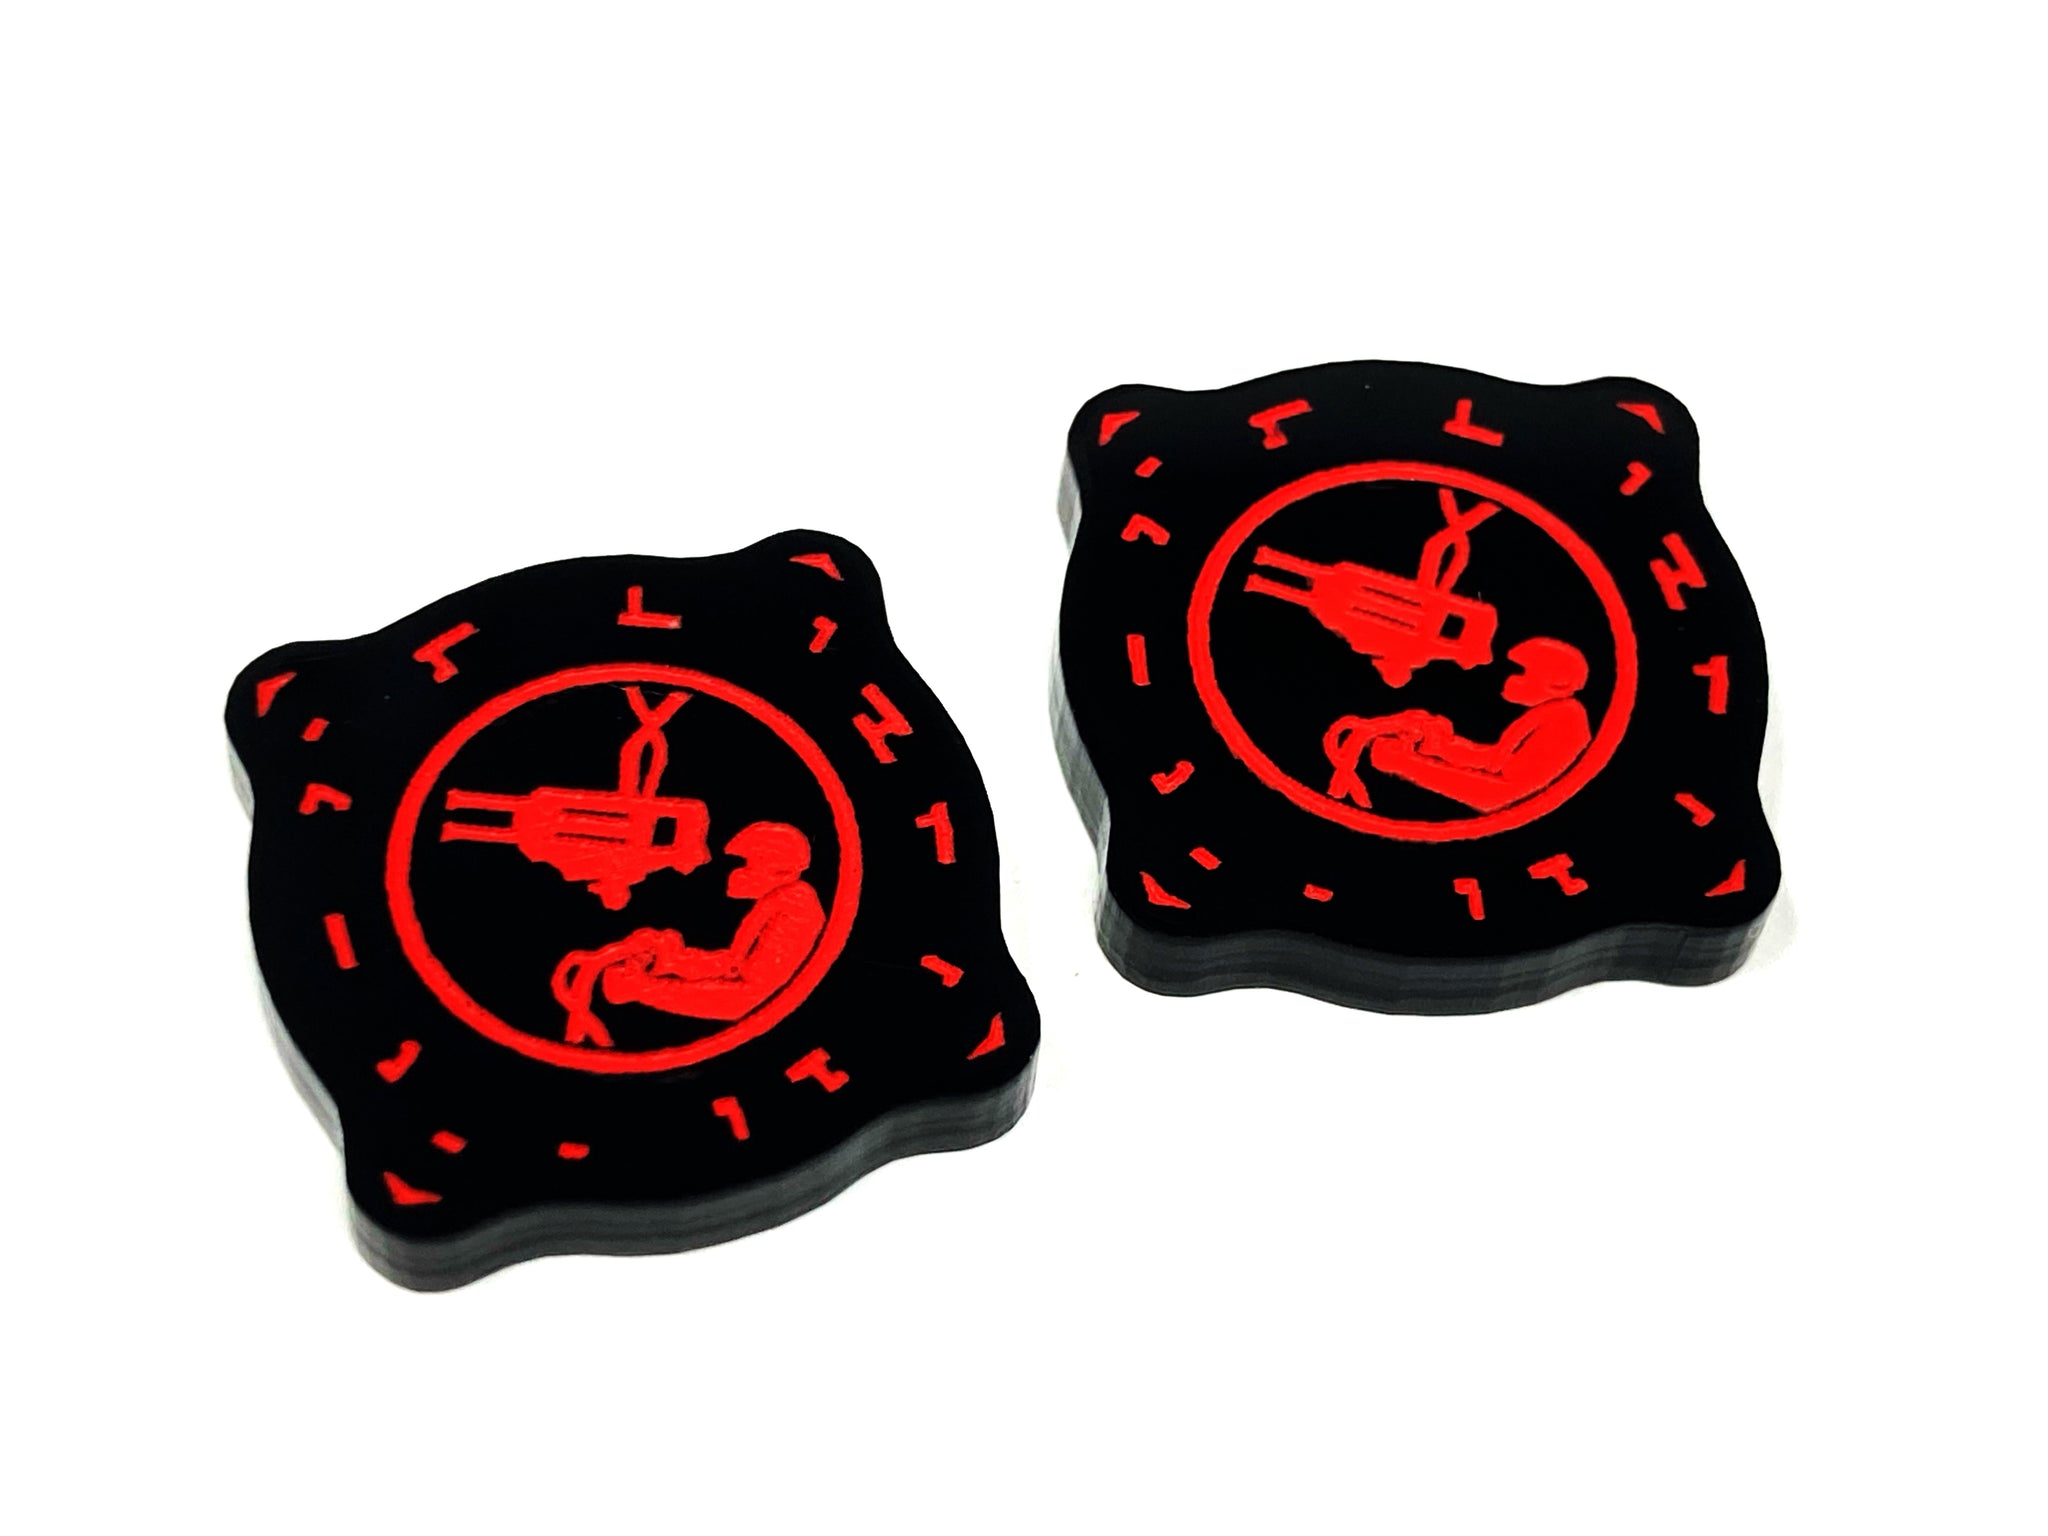 2 x Gunner Charge Tokens - Black Series (Double Sided)